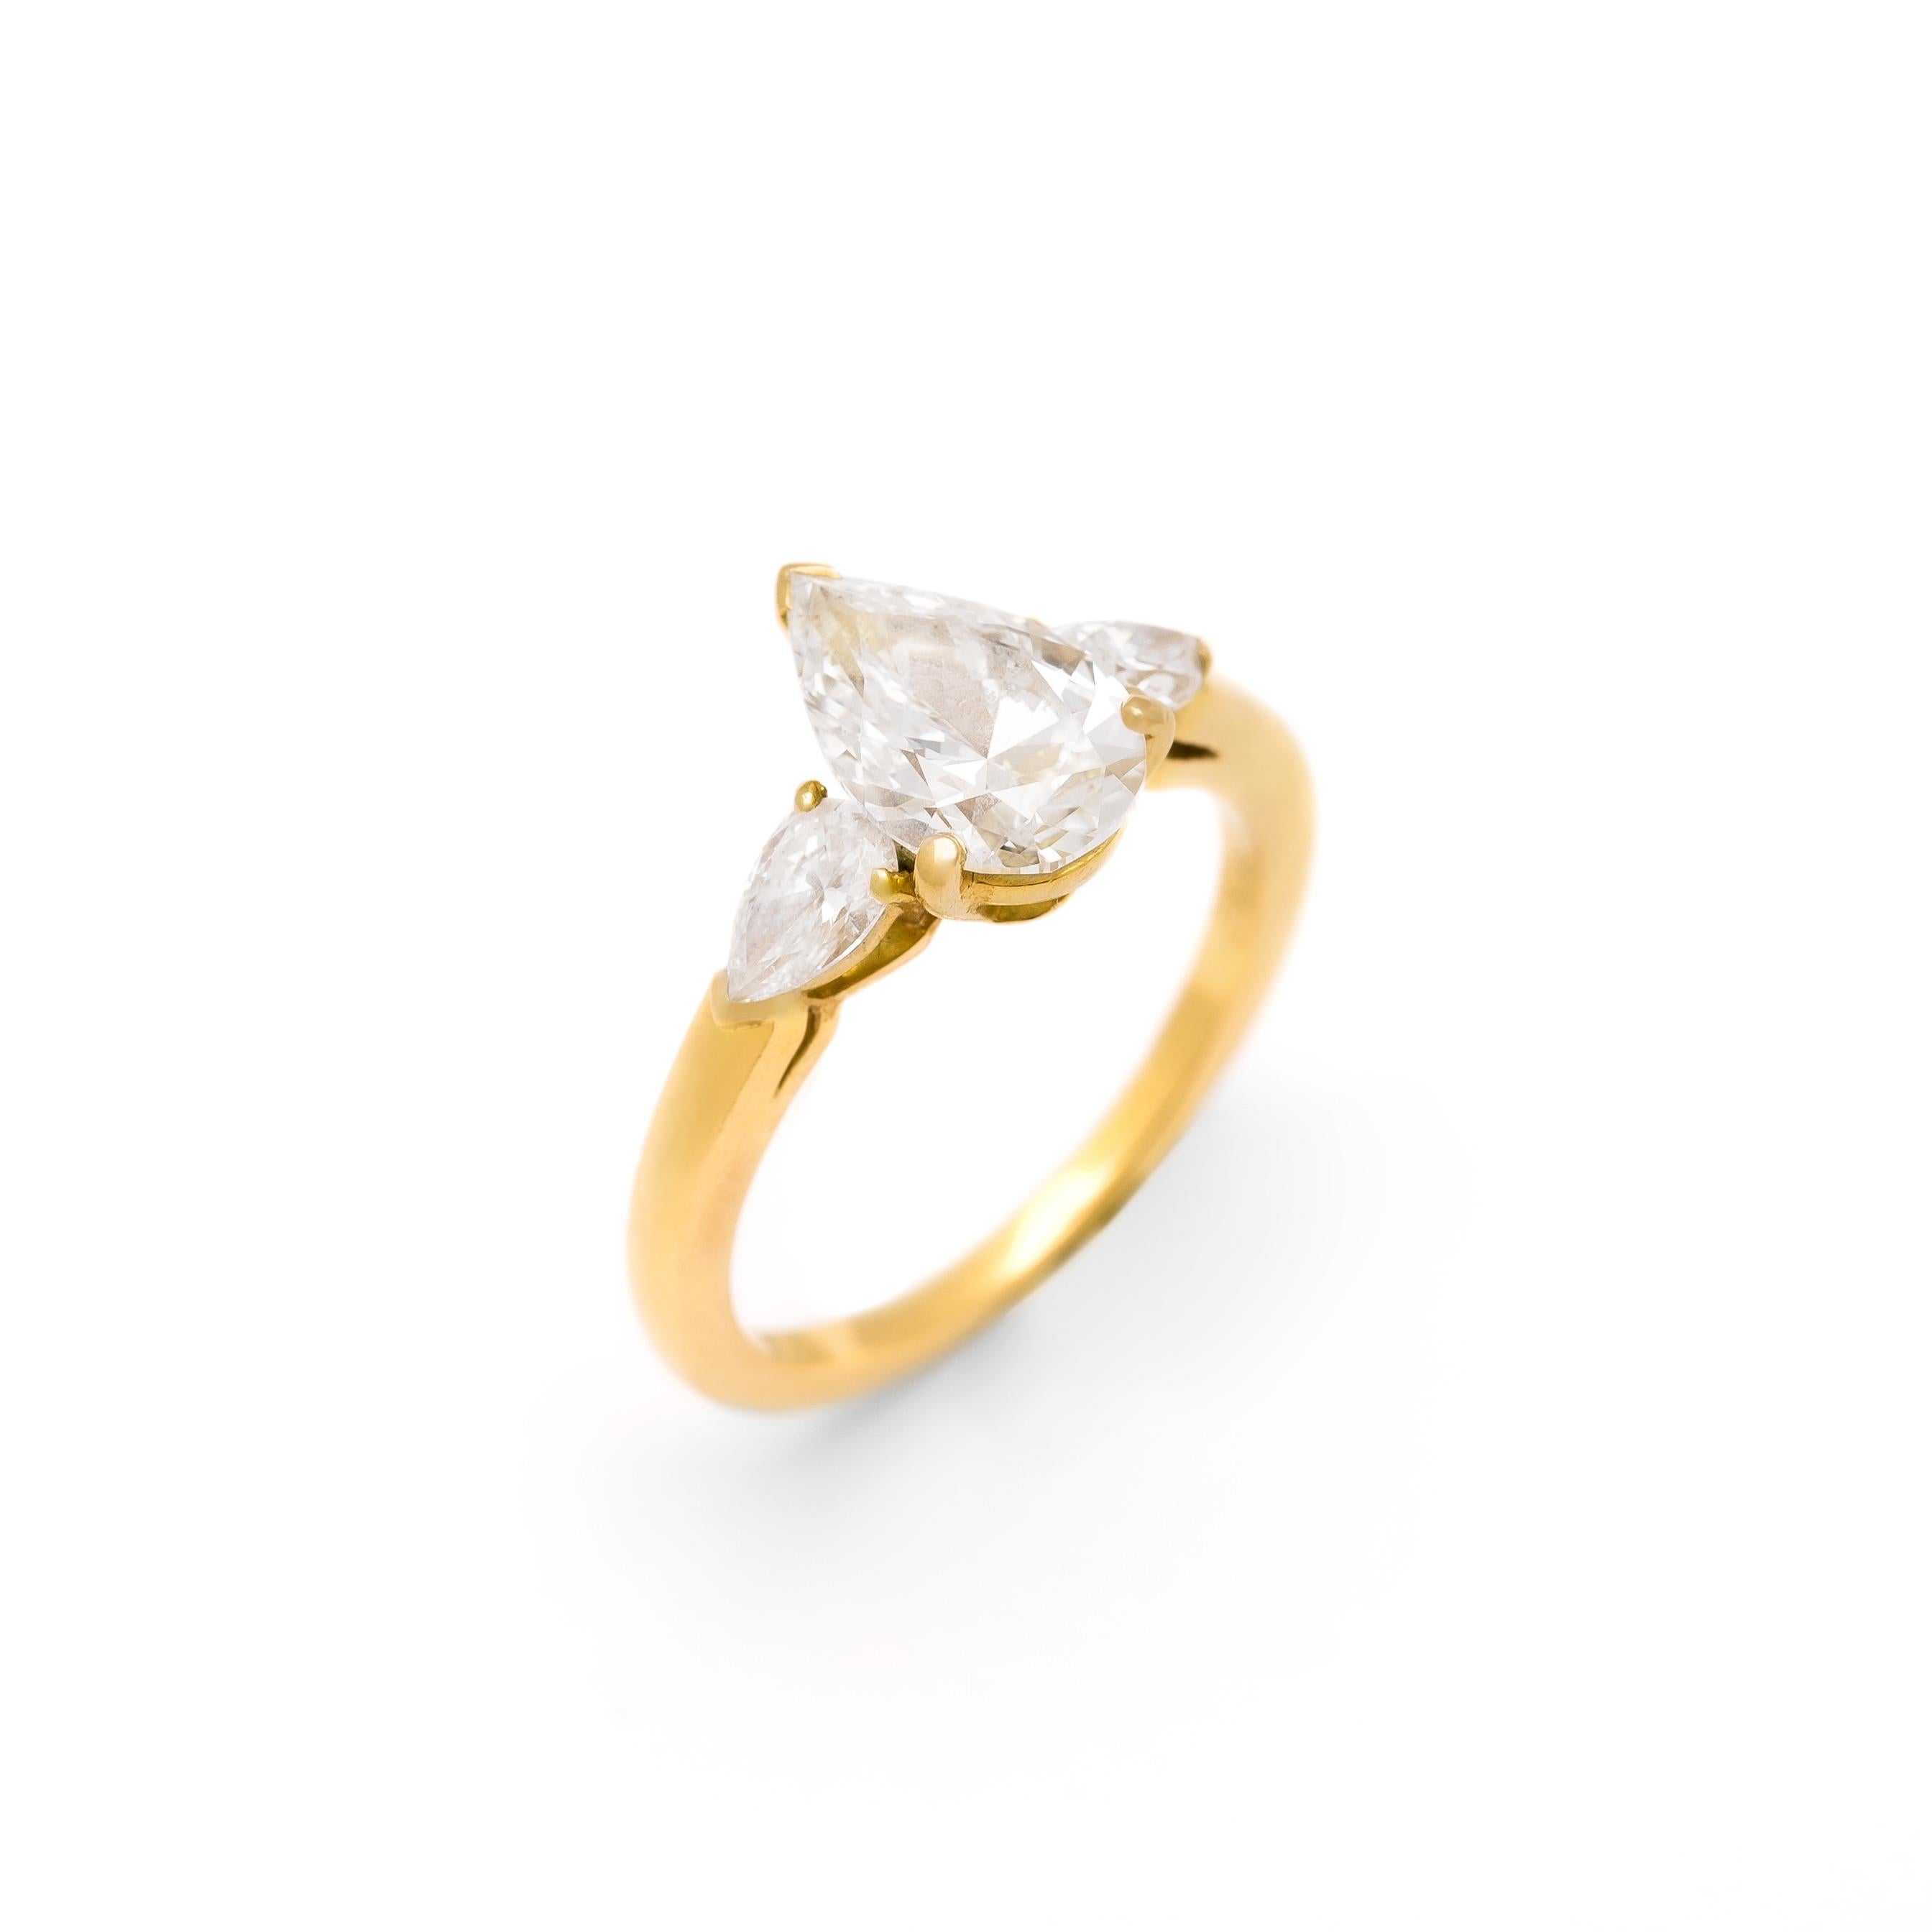 Van Cleef and Arpels 1.51 carat Pear Shape D Vvs1 Solitaire Yellow Gold 18K Ring.
1.51 carat Pear Shape D Vvs1 according to a French Laboratory certificate from 1998.
The central Diamond is shouldered each side by two Pear shape Diamond